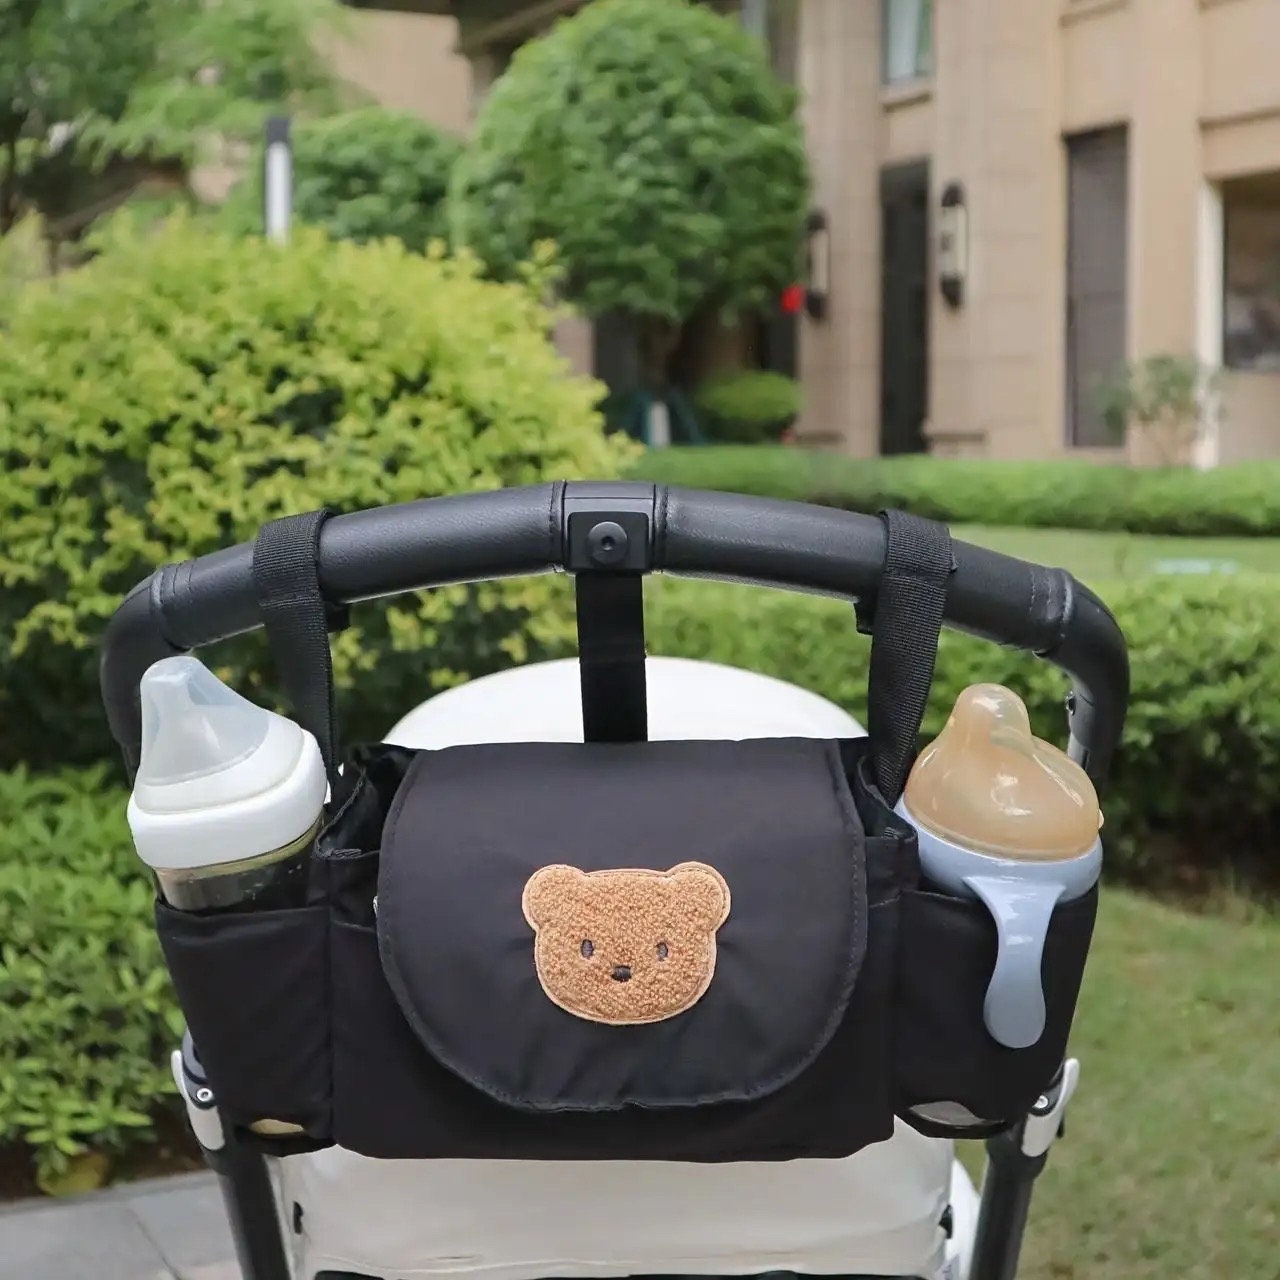 1pc Universal Baby Stroller Storage Bag With Hook & Insulated Cup